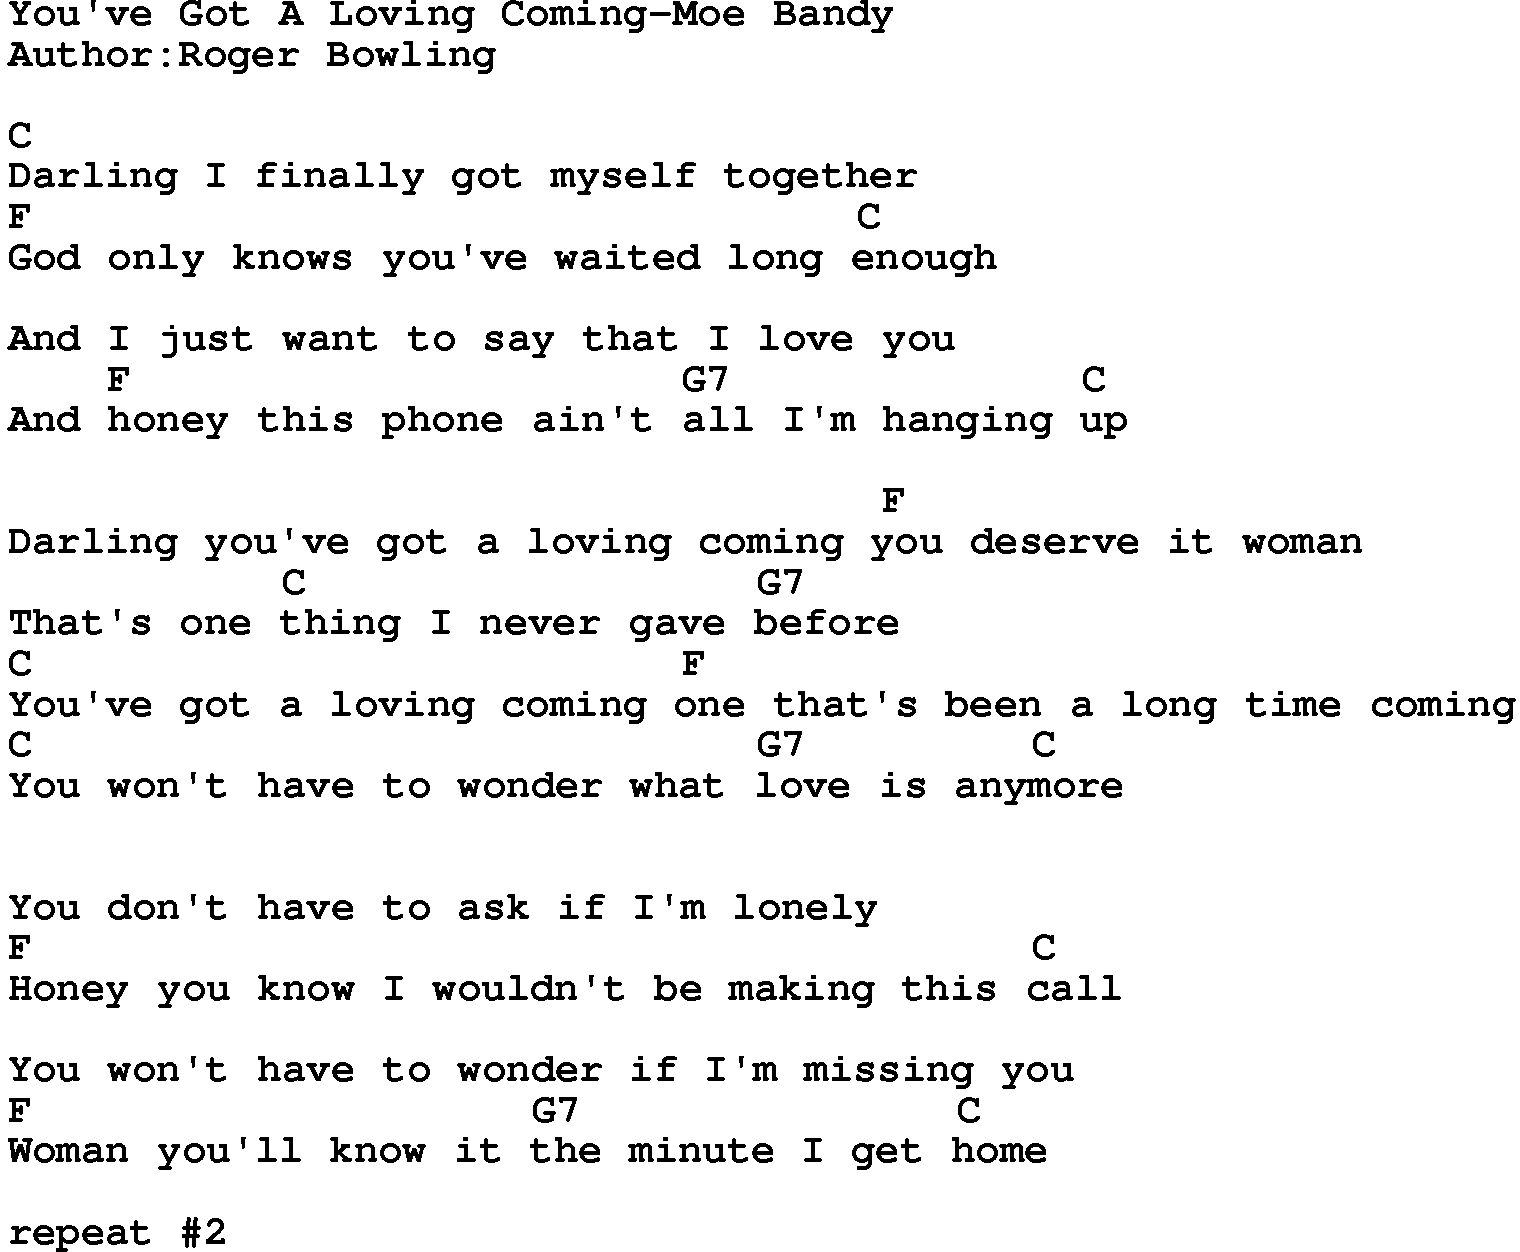 Country music song: You've Got A Loving Coming-Moe Bandy lyrics and chords